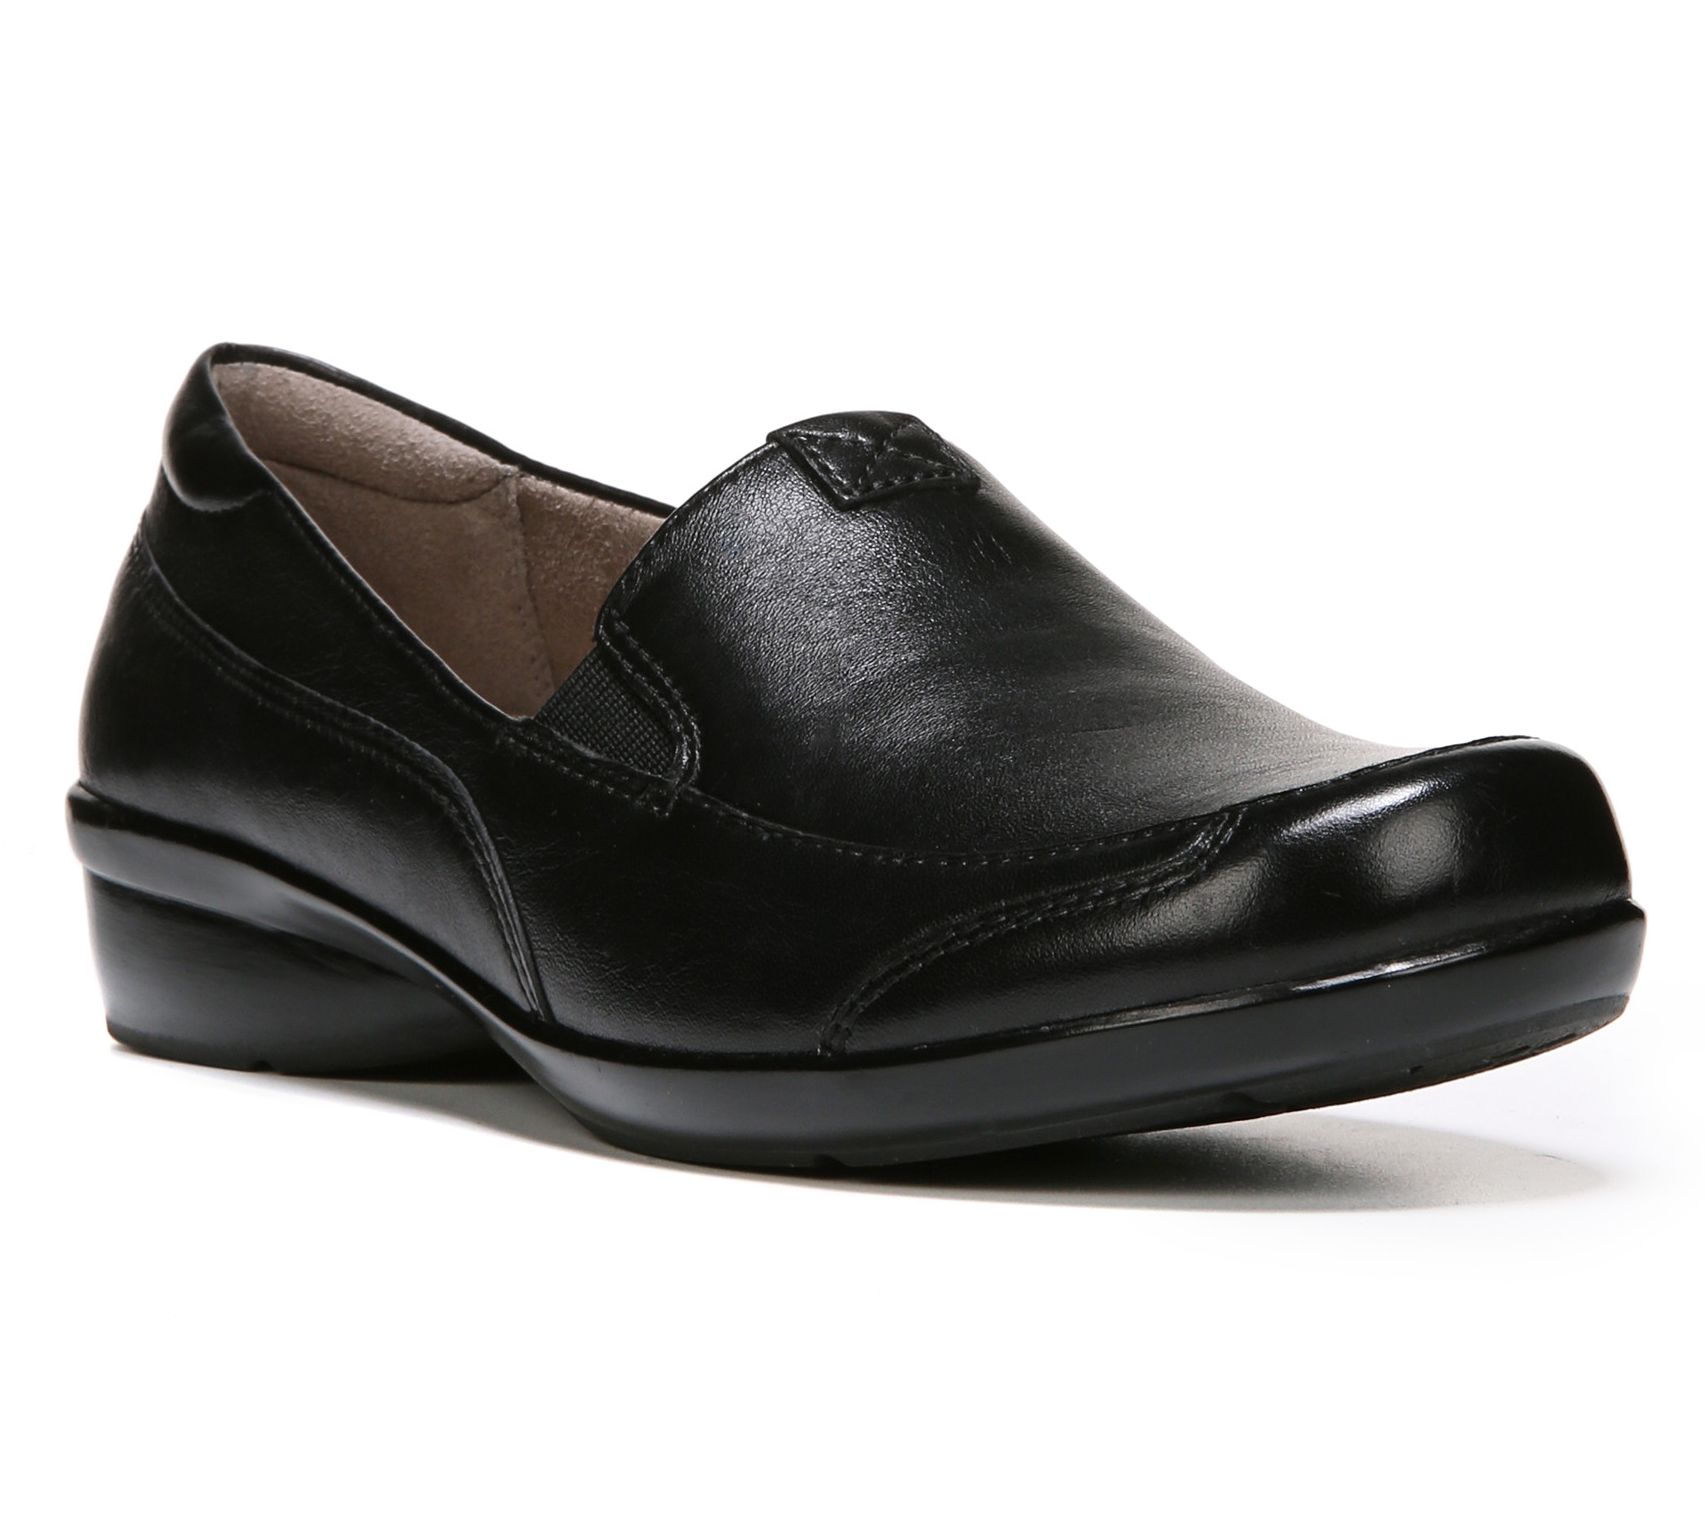 Naturalizer Slip-On Leather Loafers - Channing - QVC.com